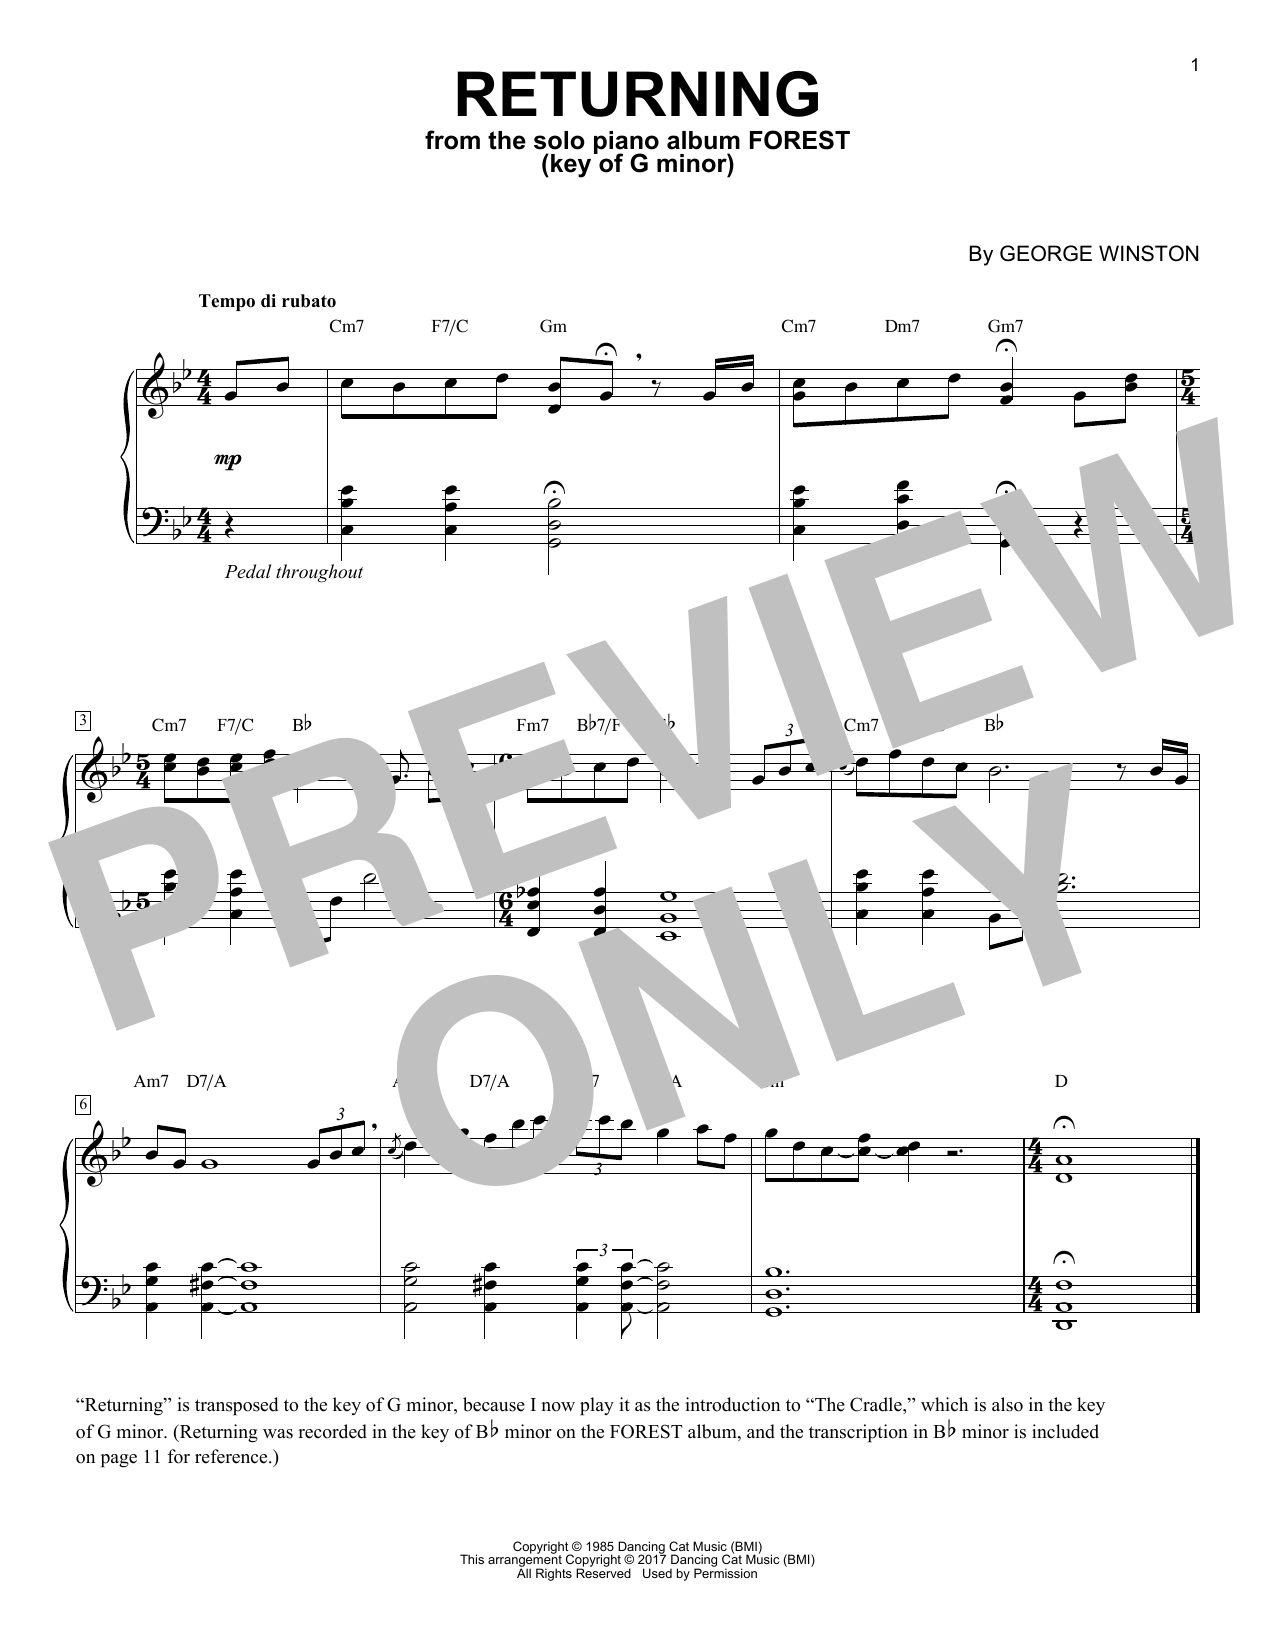 Download George Winston Returning In The Key Of G Minor Sheet Music